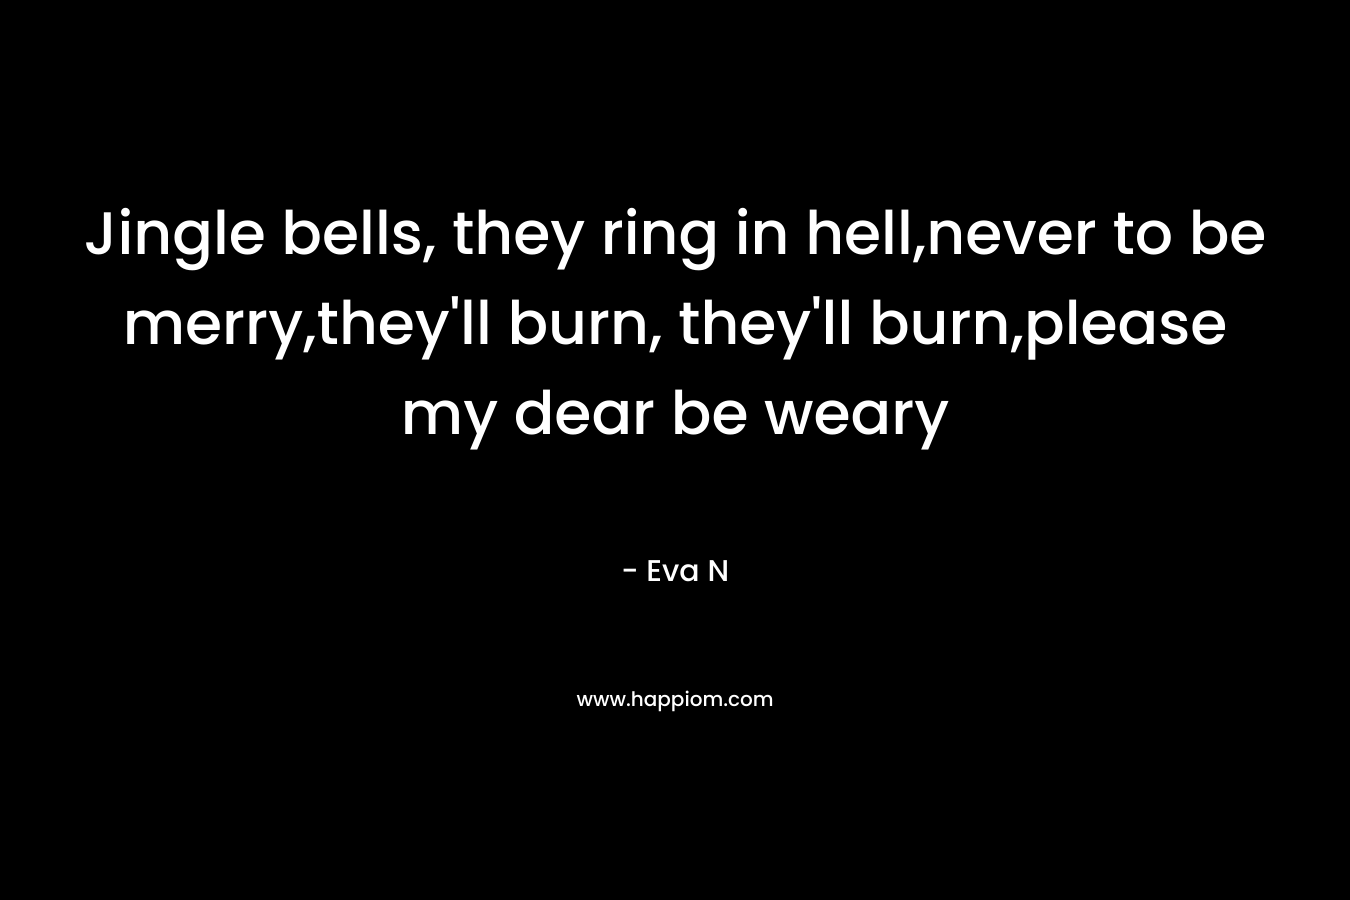 Jingle bells, they ring in hell,never to be merry,they’ll burn, they’ll burn,please my dear be weary – Eva N